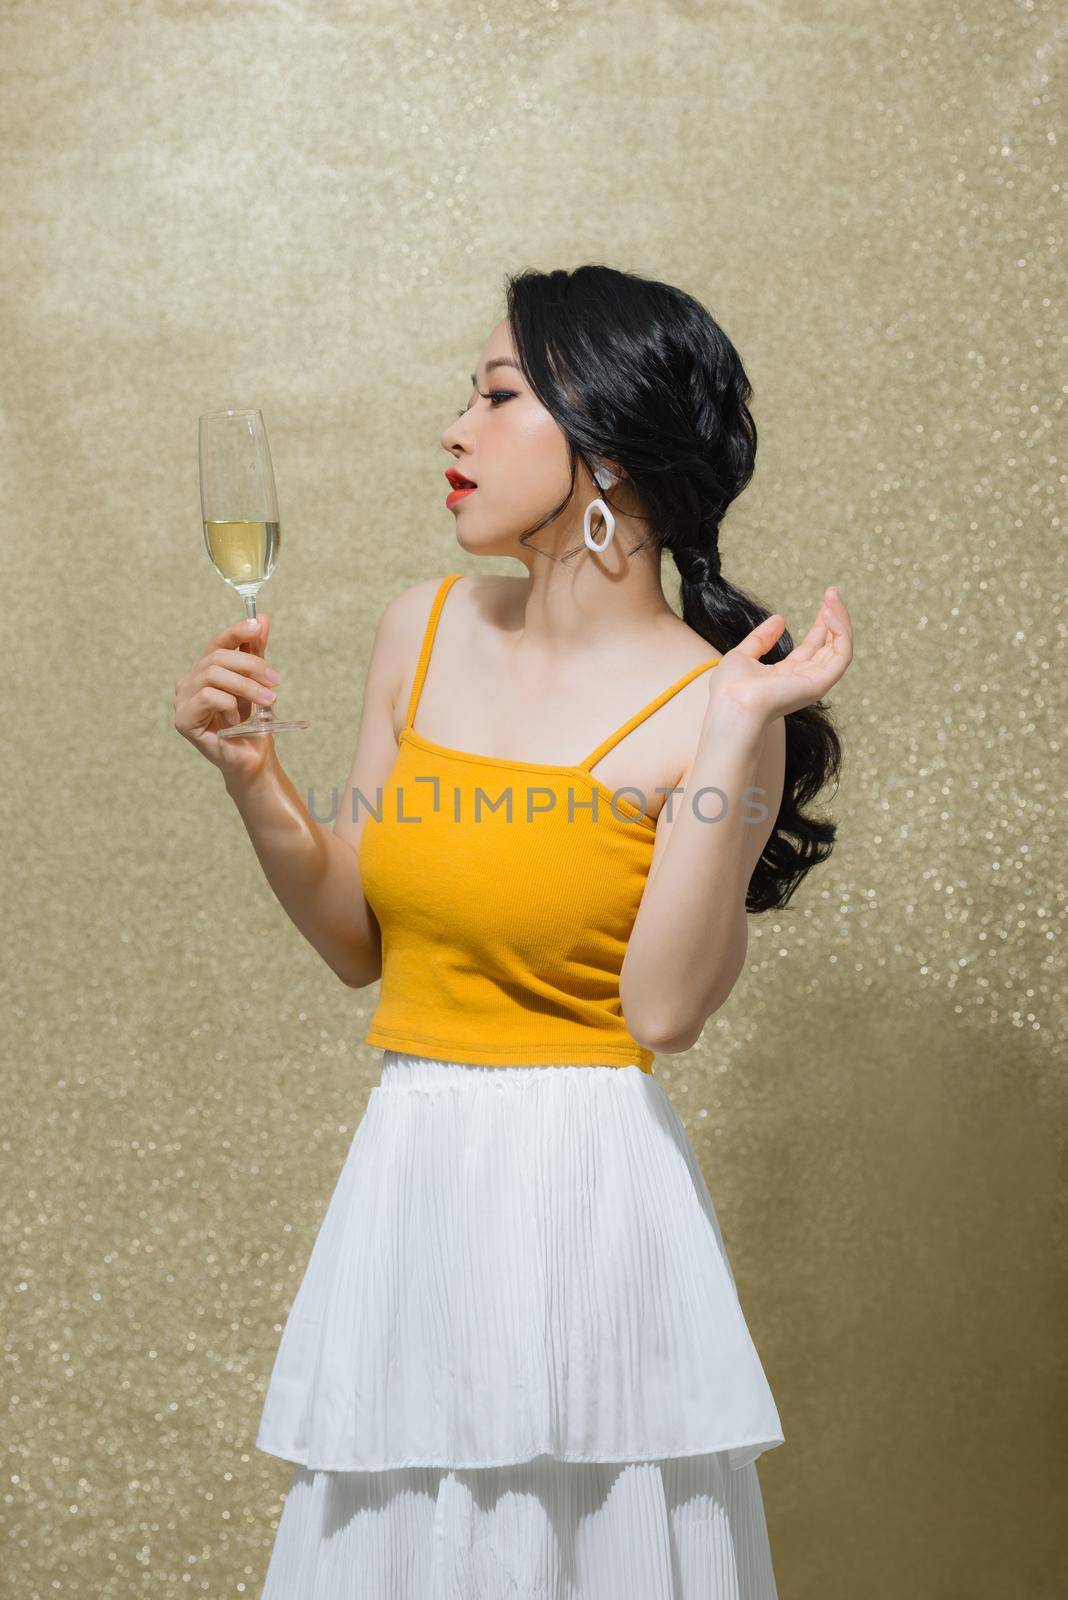 Beautiful young Asian woman raising wine glass over gold background. Party concept. by makidotvn